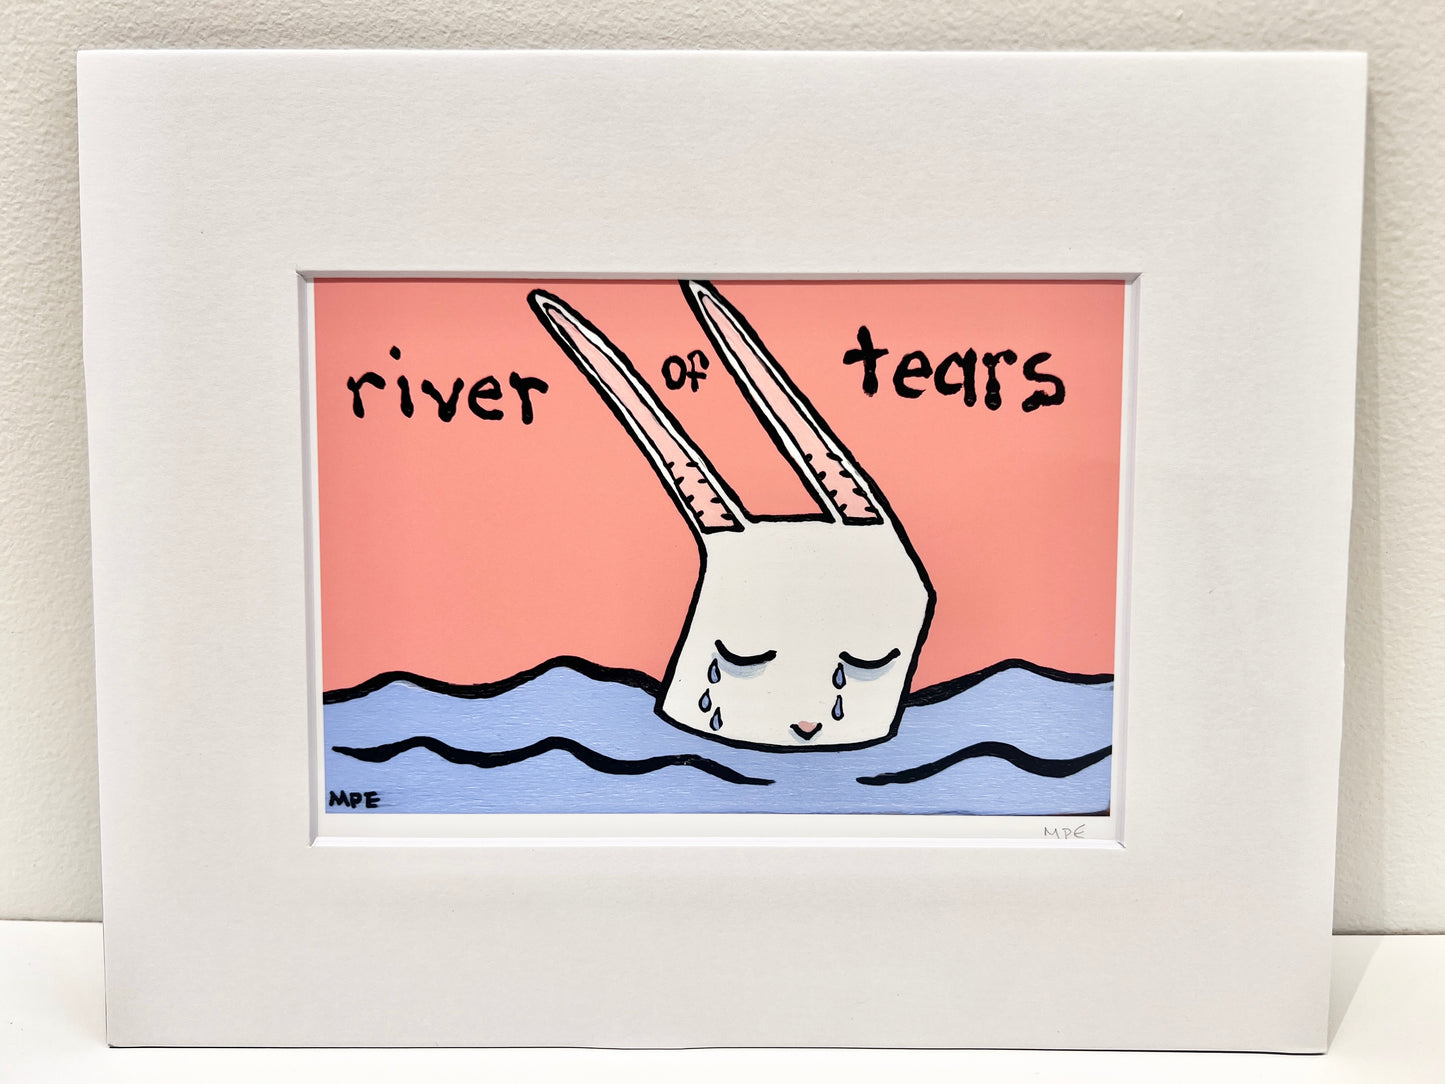 Sadness Rabbit, Open Edition Prints by Mary Engel